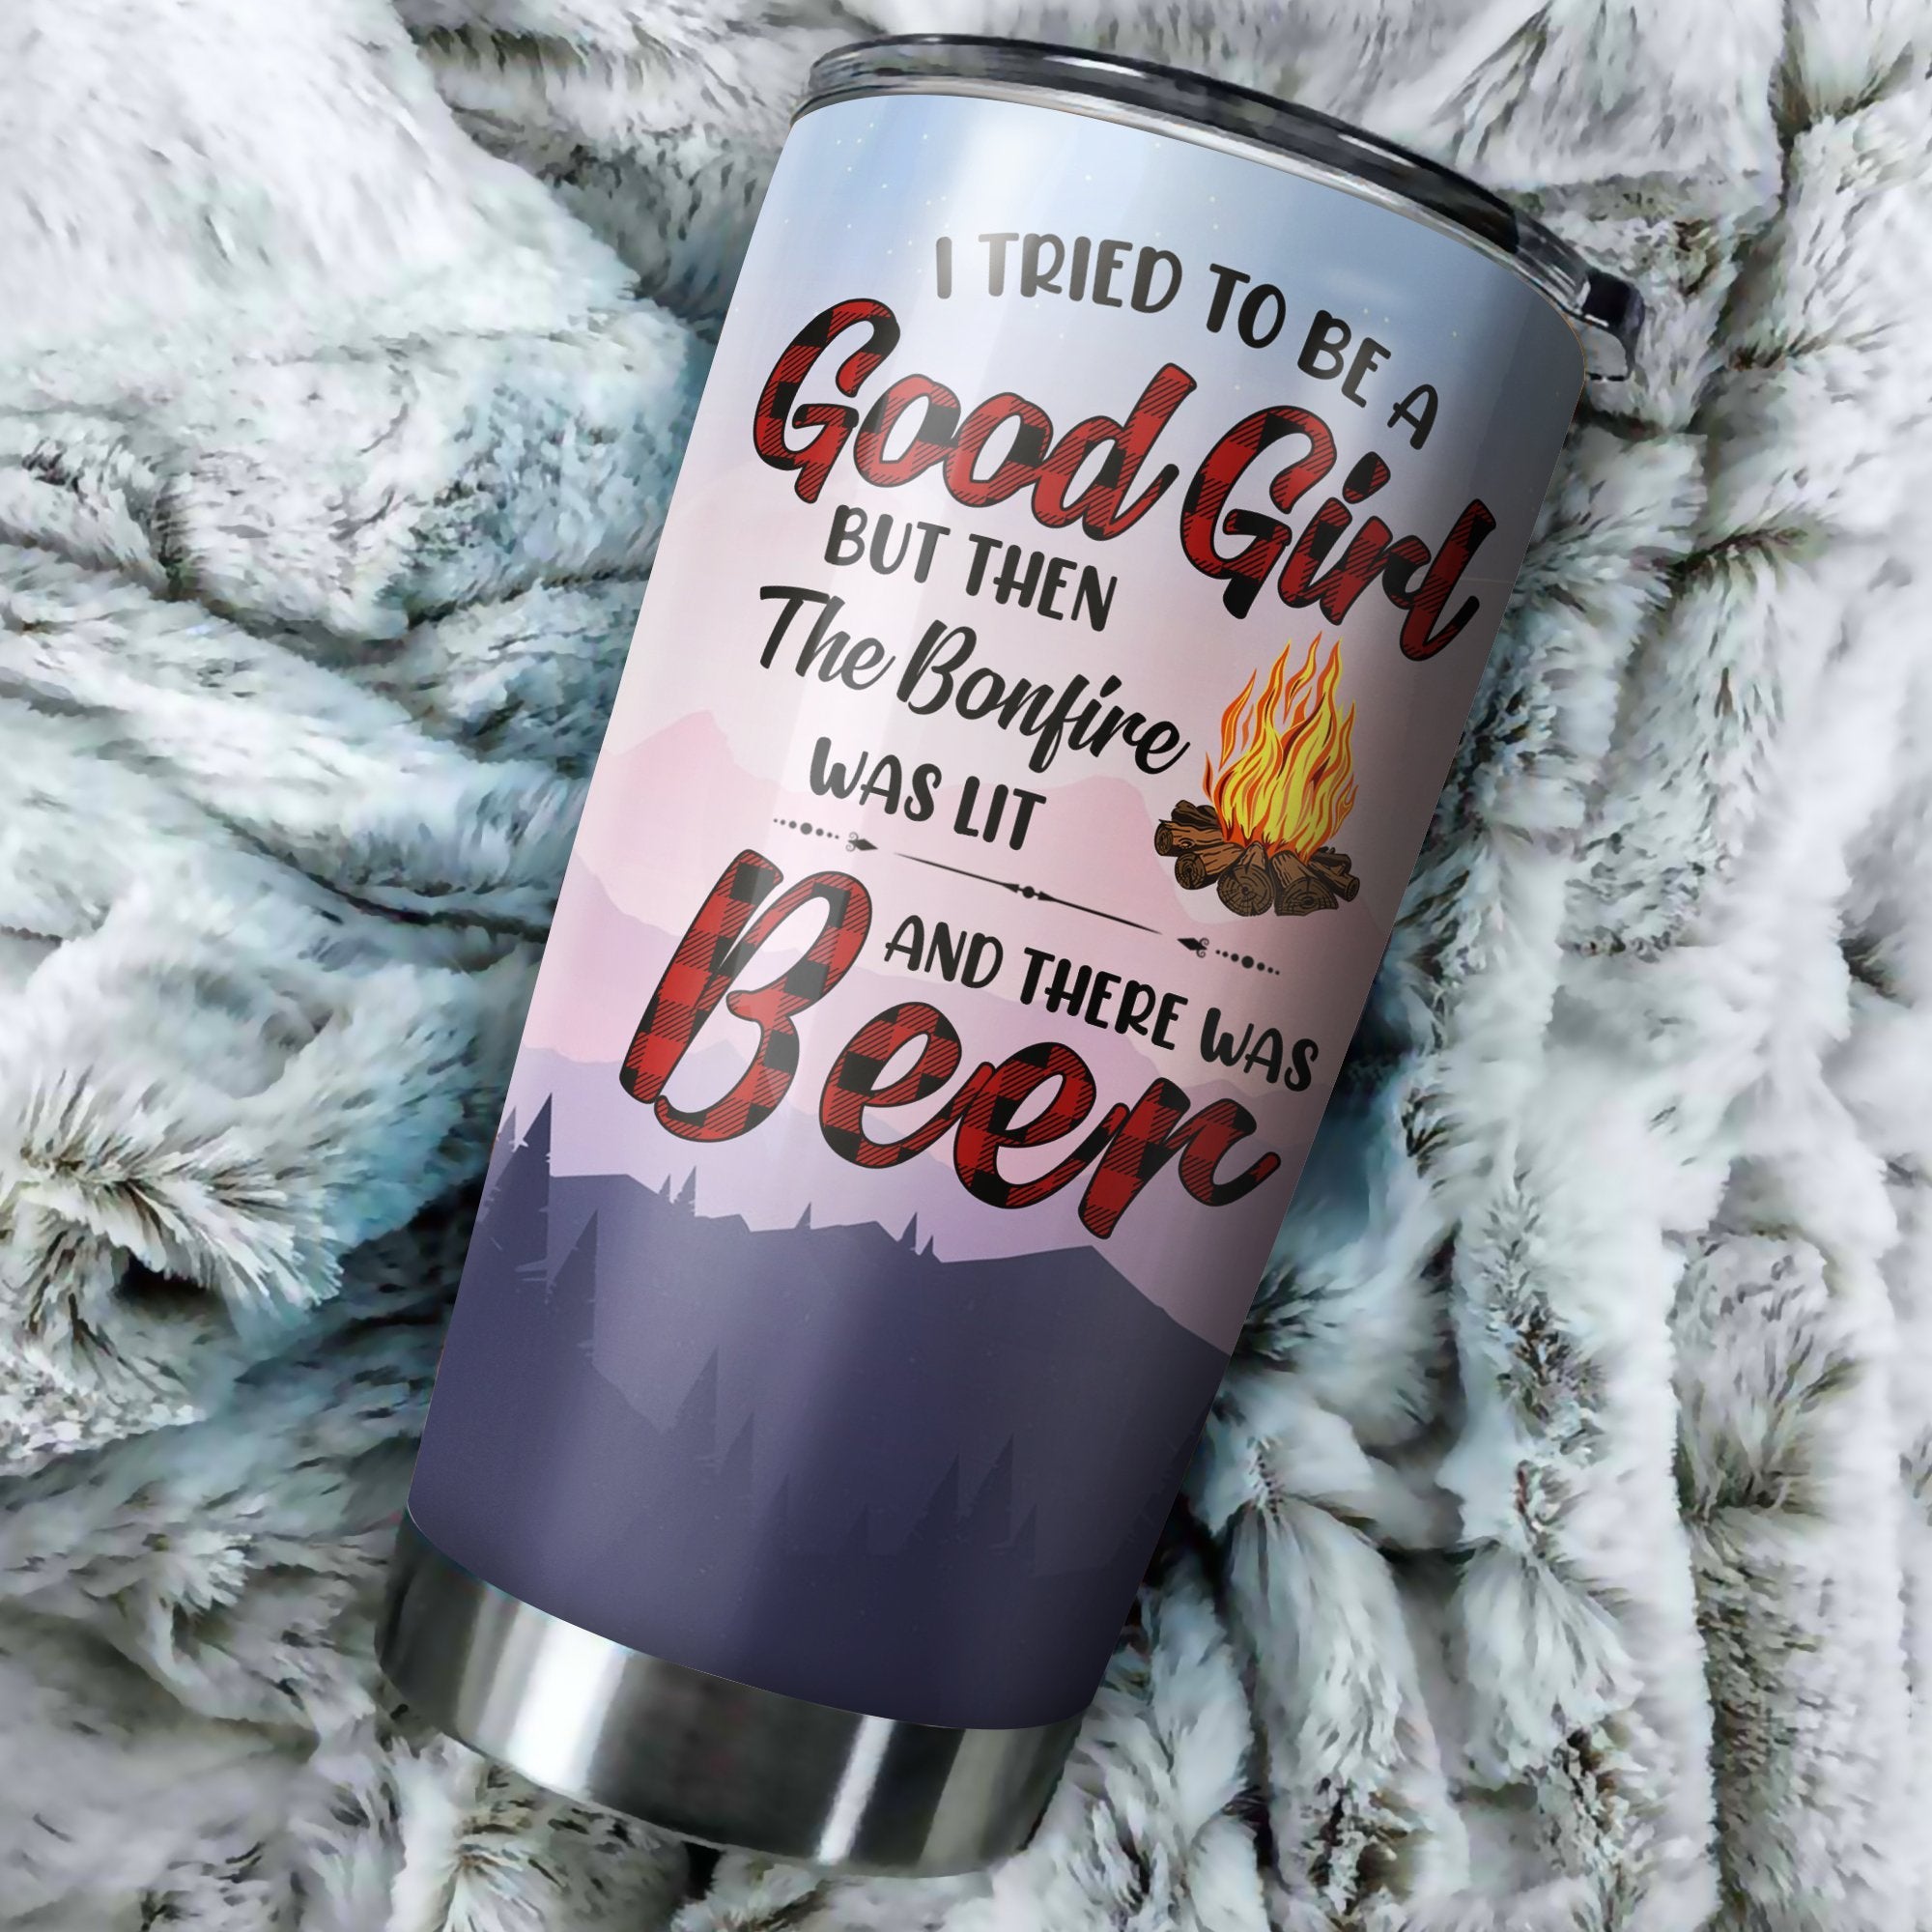 I Tried To Be A Good Girl And Beer Camping Camfire Tumbler 2023 Nearkii